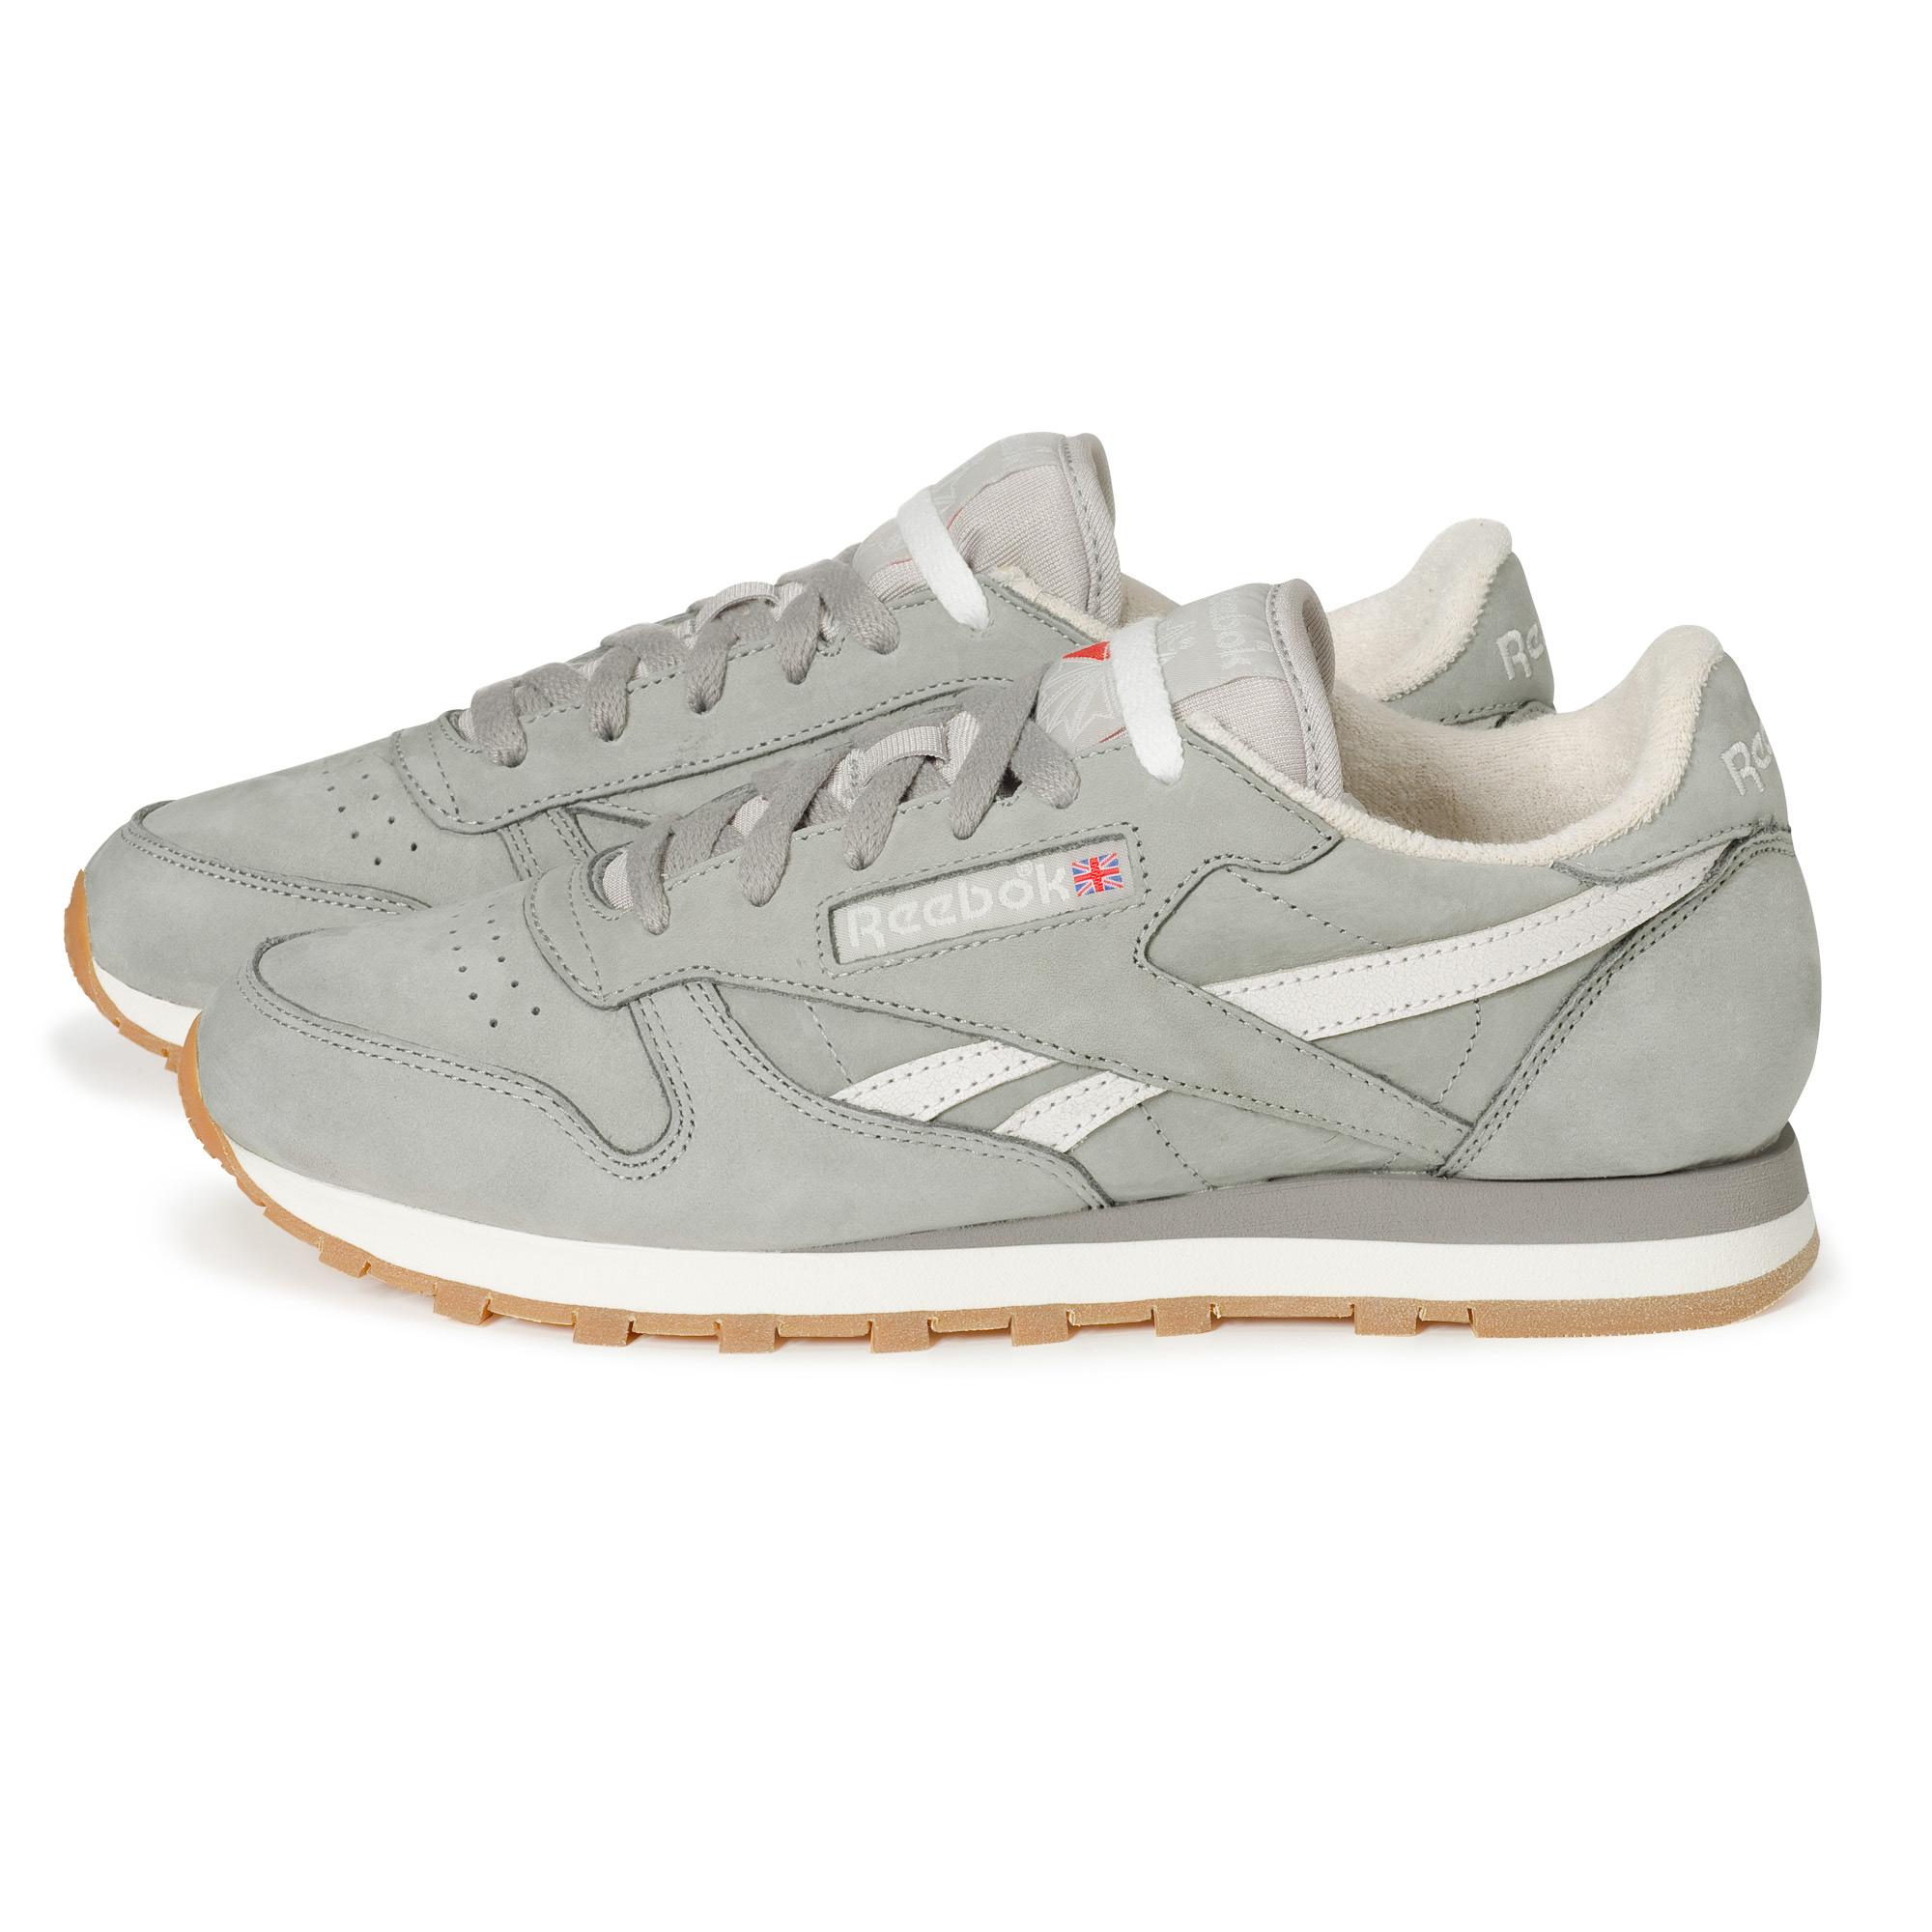 Foto Reebok Classic Leather Vintage Mujer